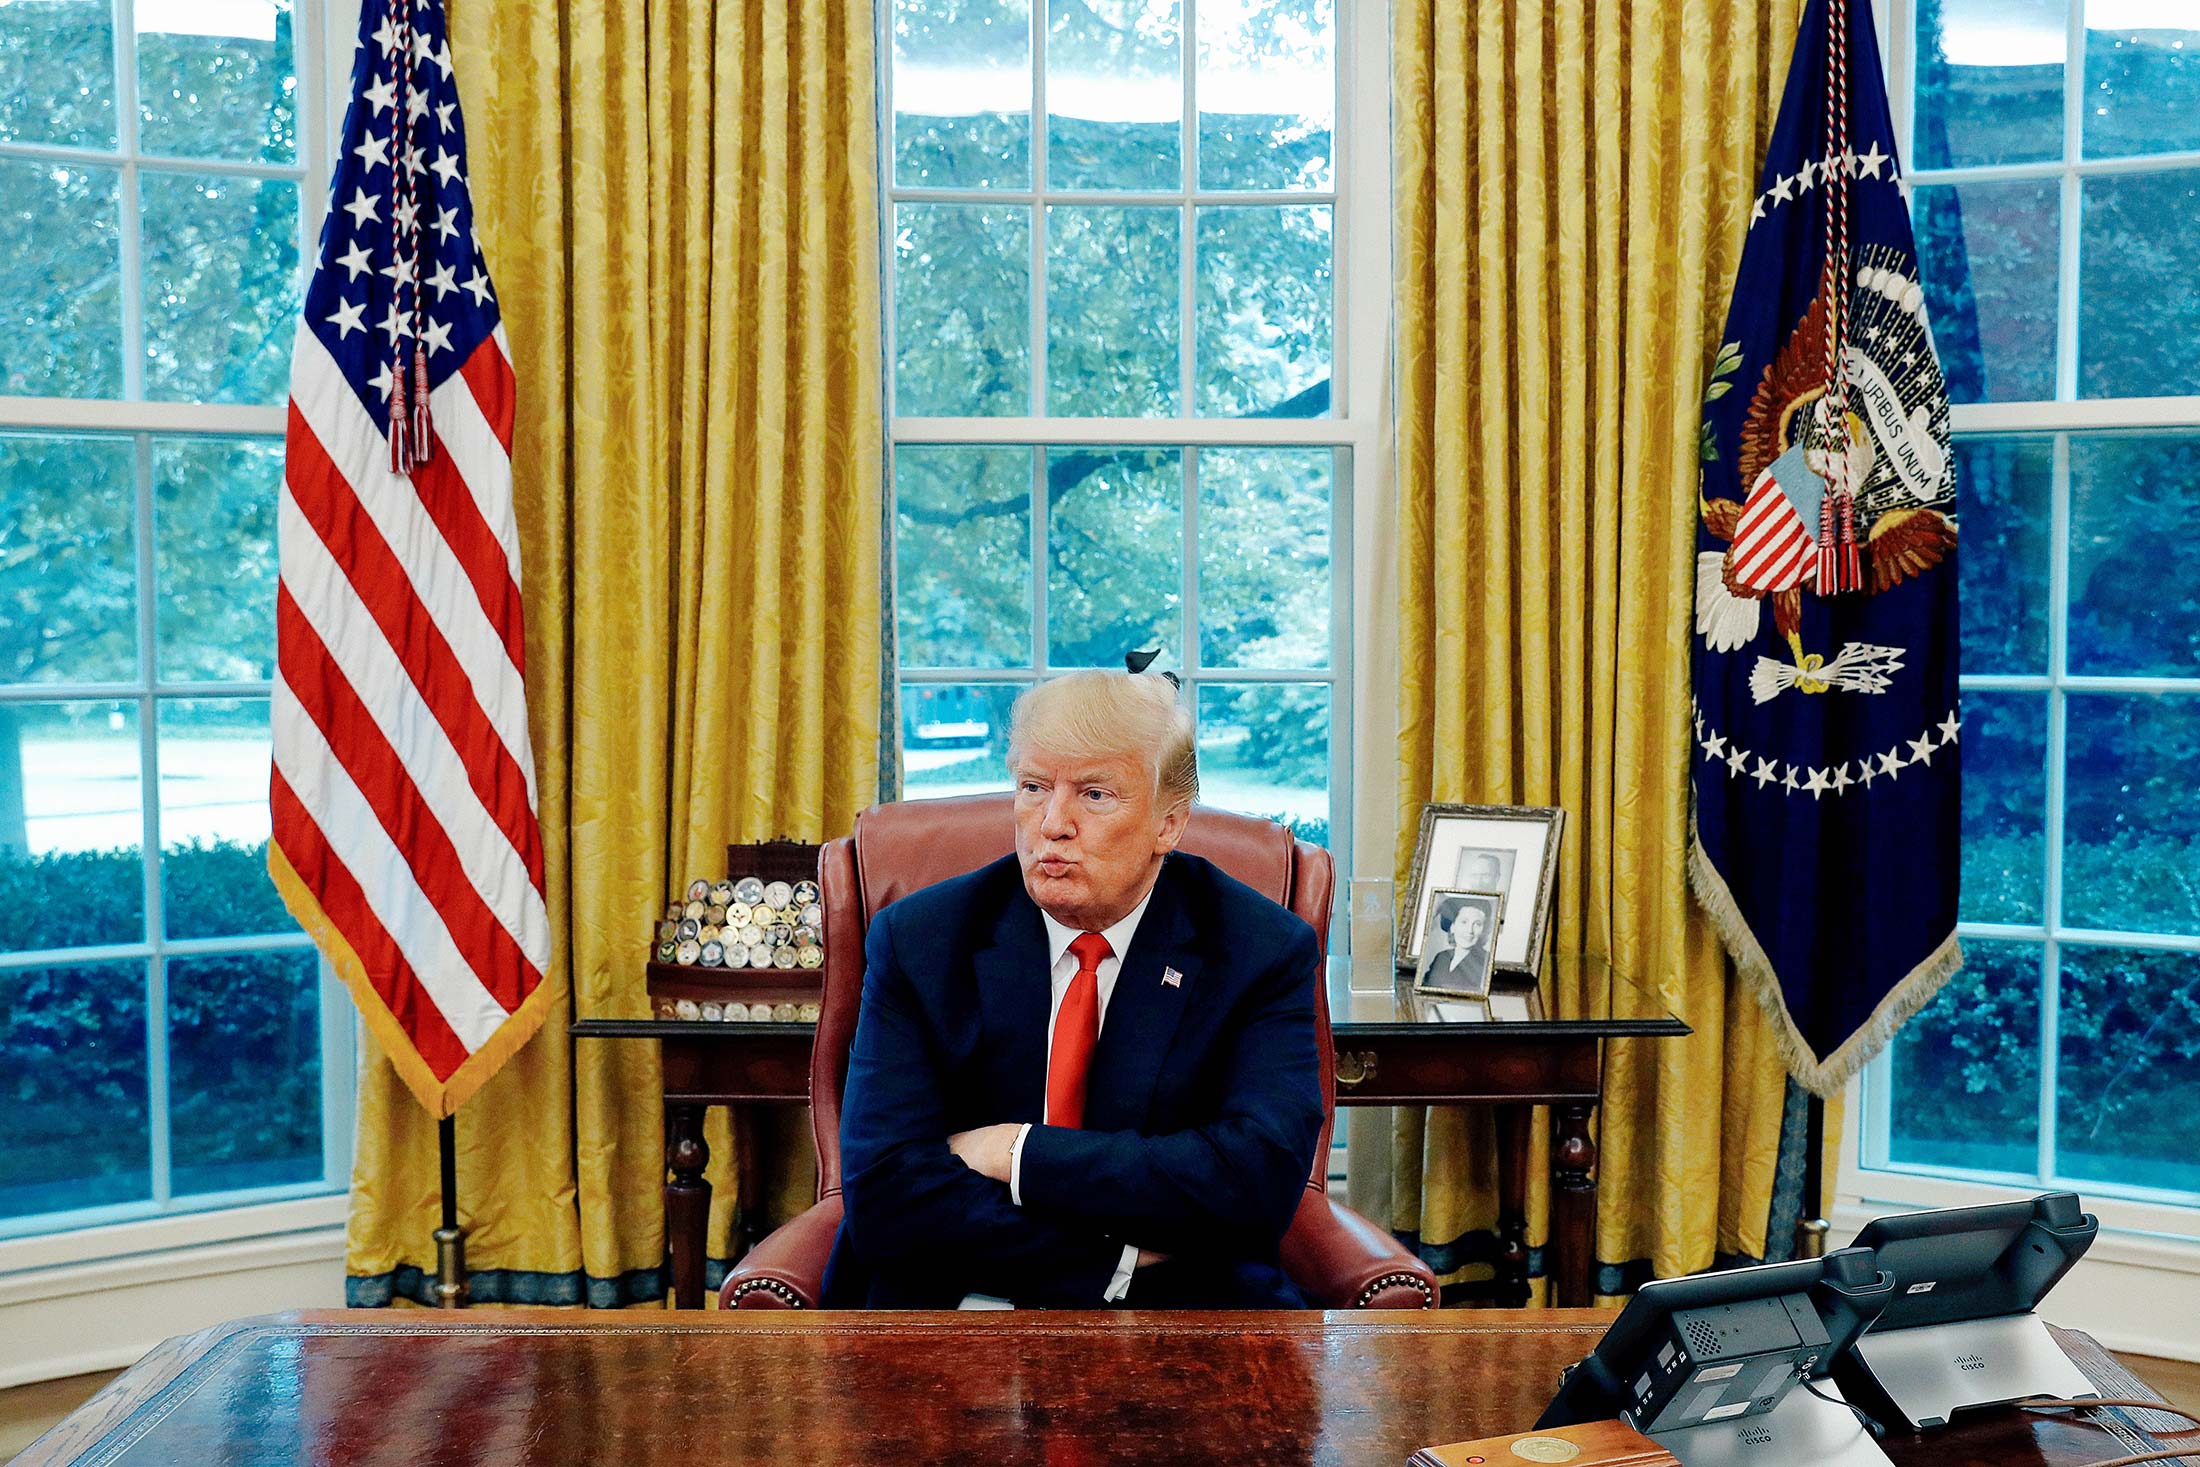 Donald Trump crosses his arms across his chest while sitting behind his desk in the Oval Office.